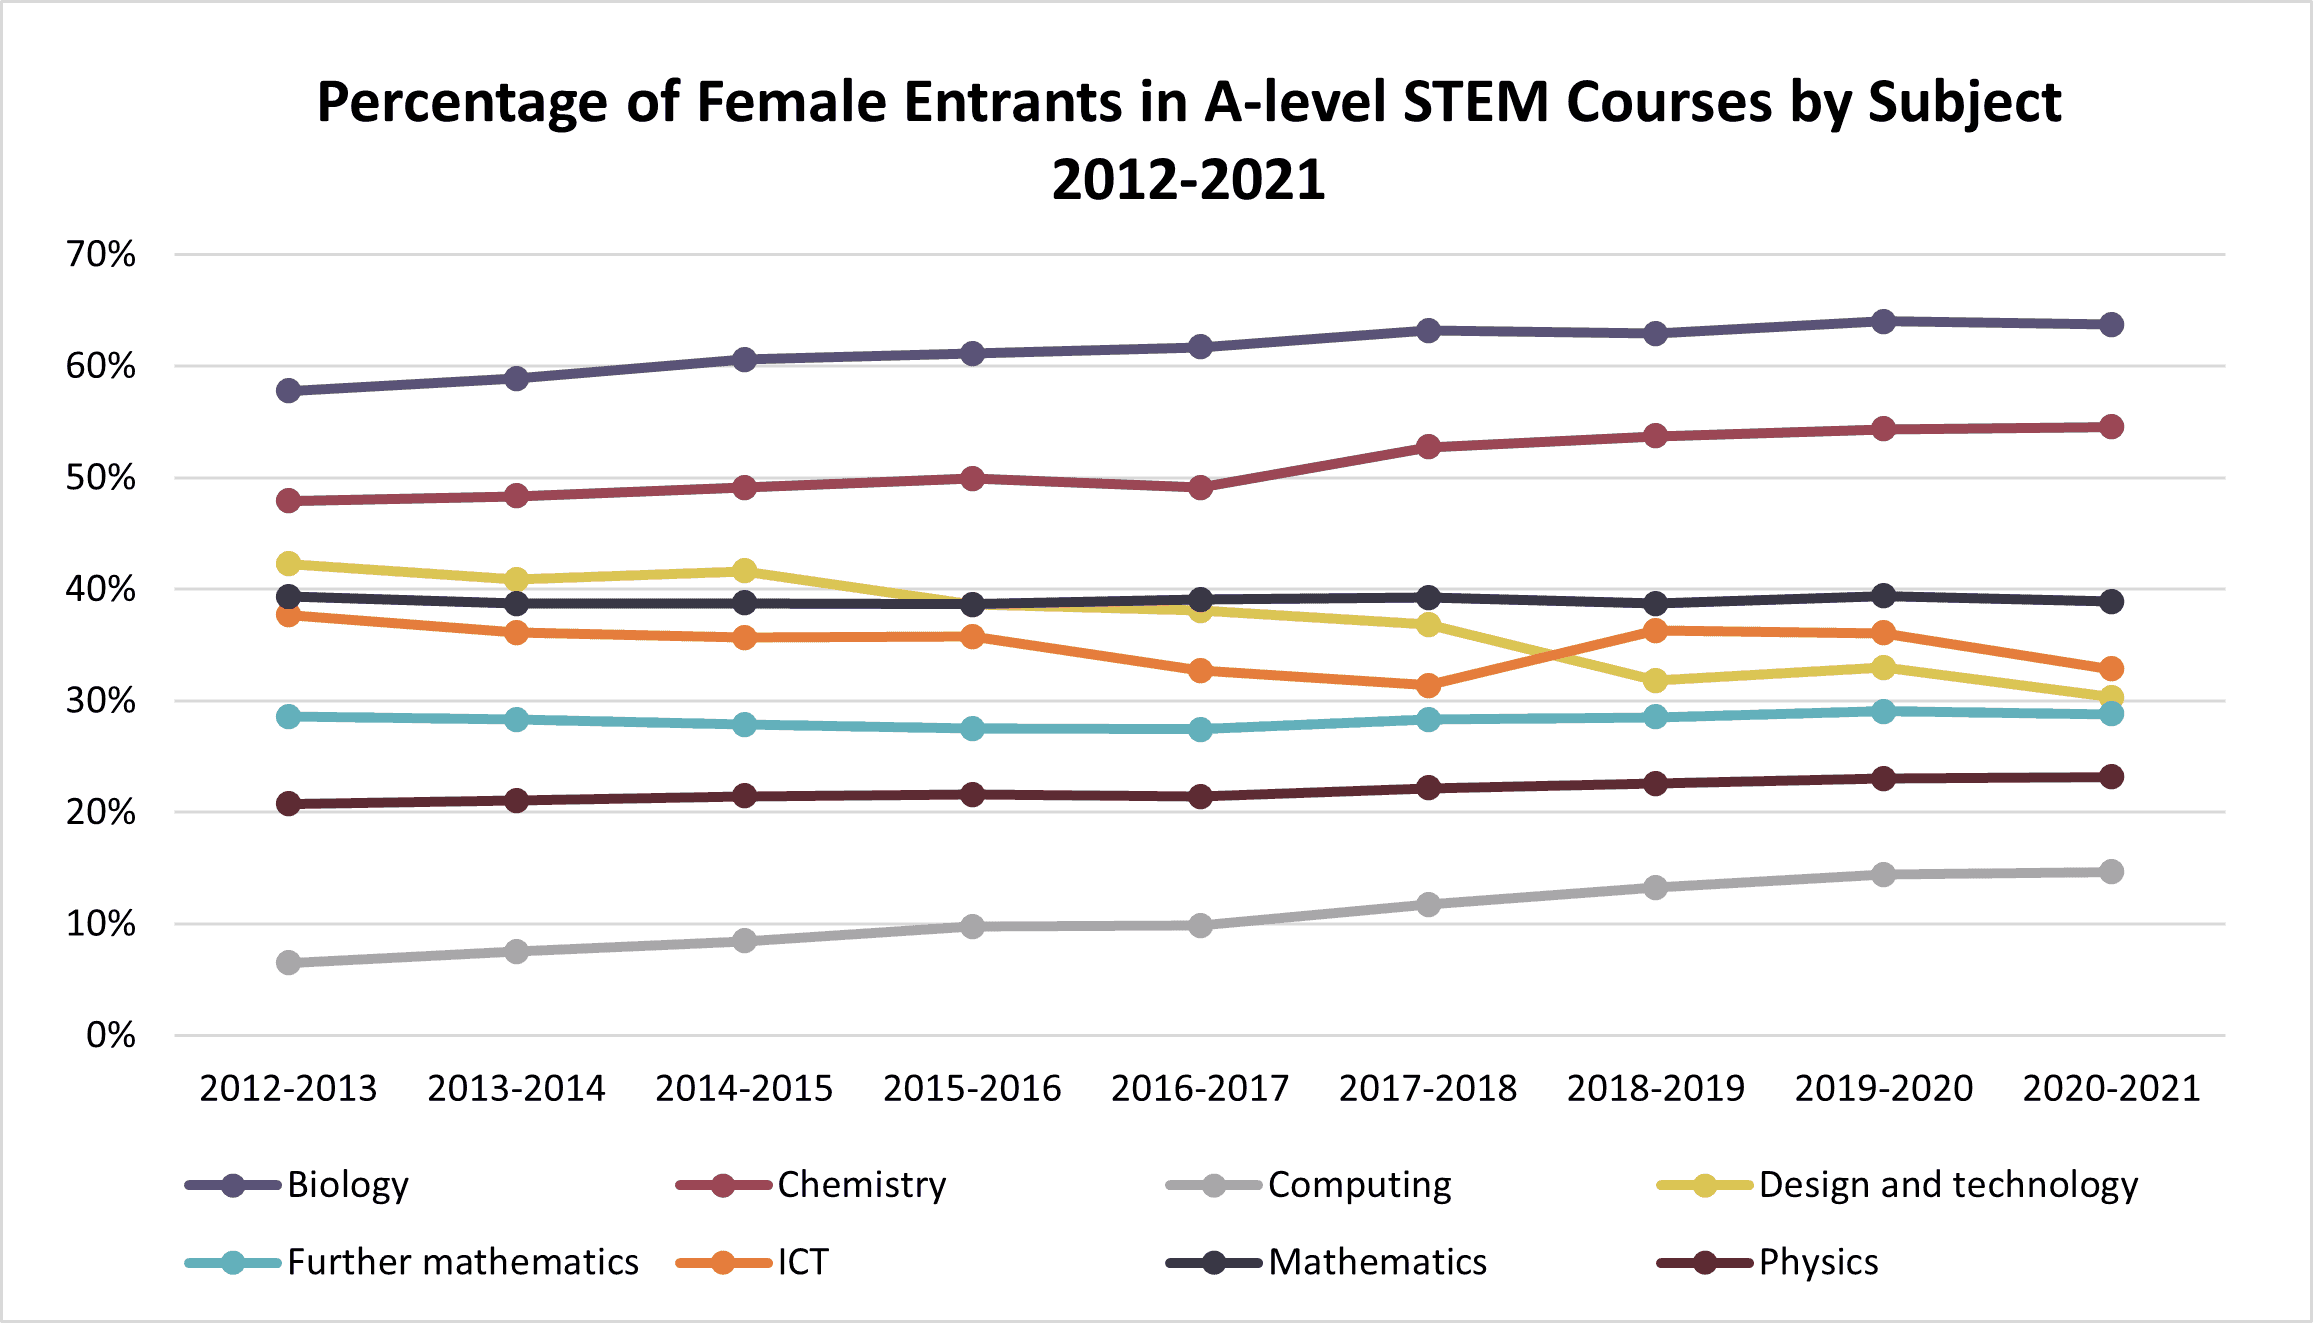 Percentage of Female Entrants in A-level STEM Courses by Subject 2012-2021